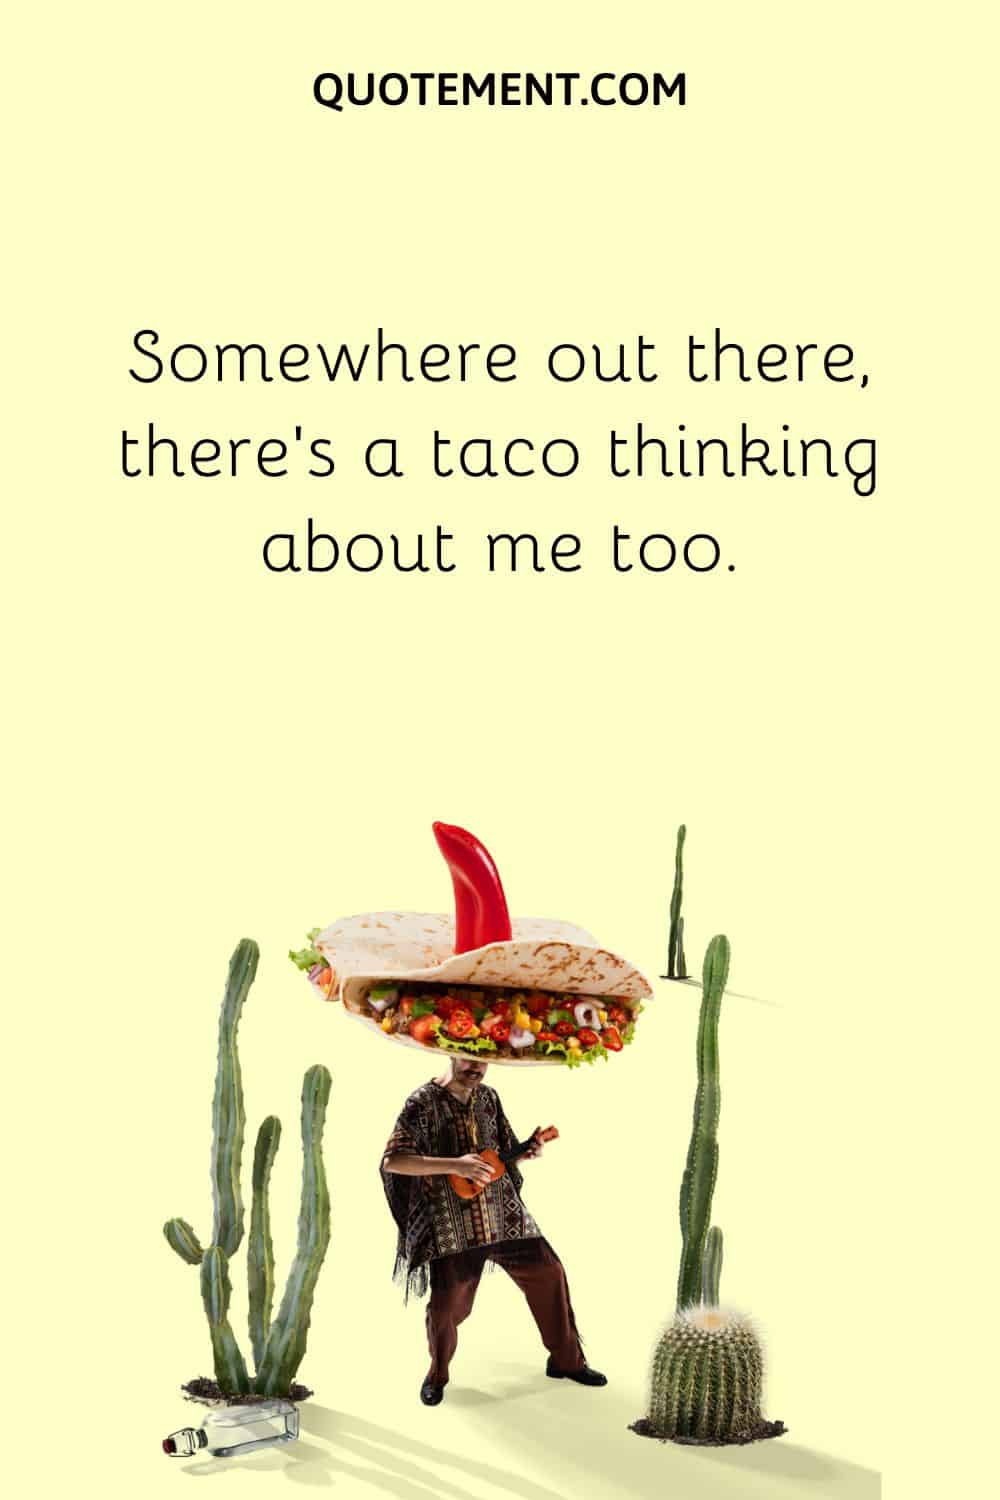 Somewhere out there, there’s a taco thinking about me too